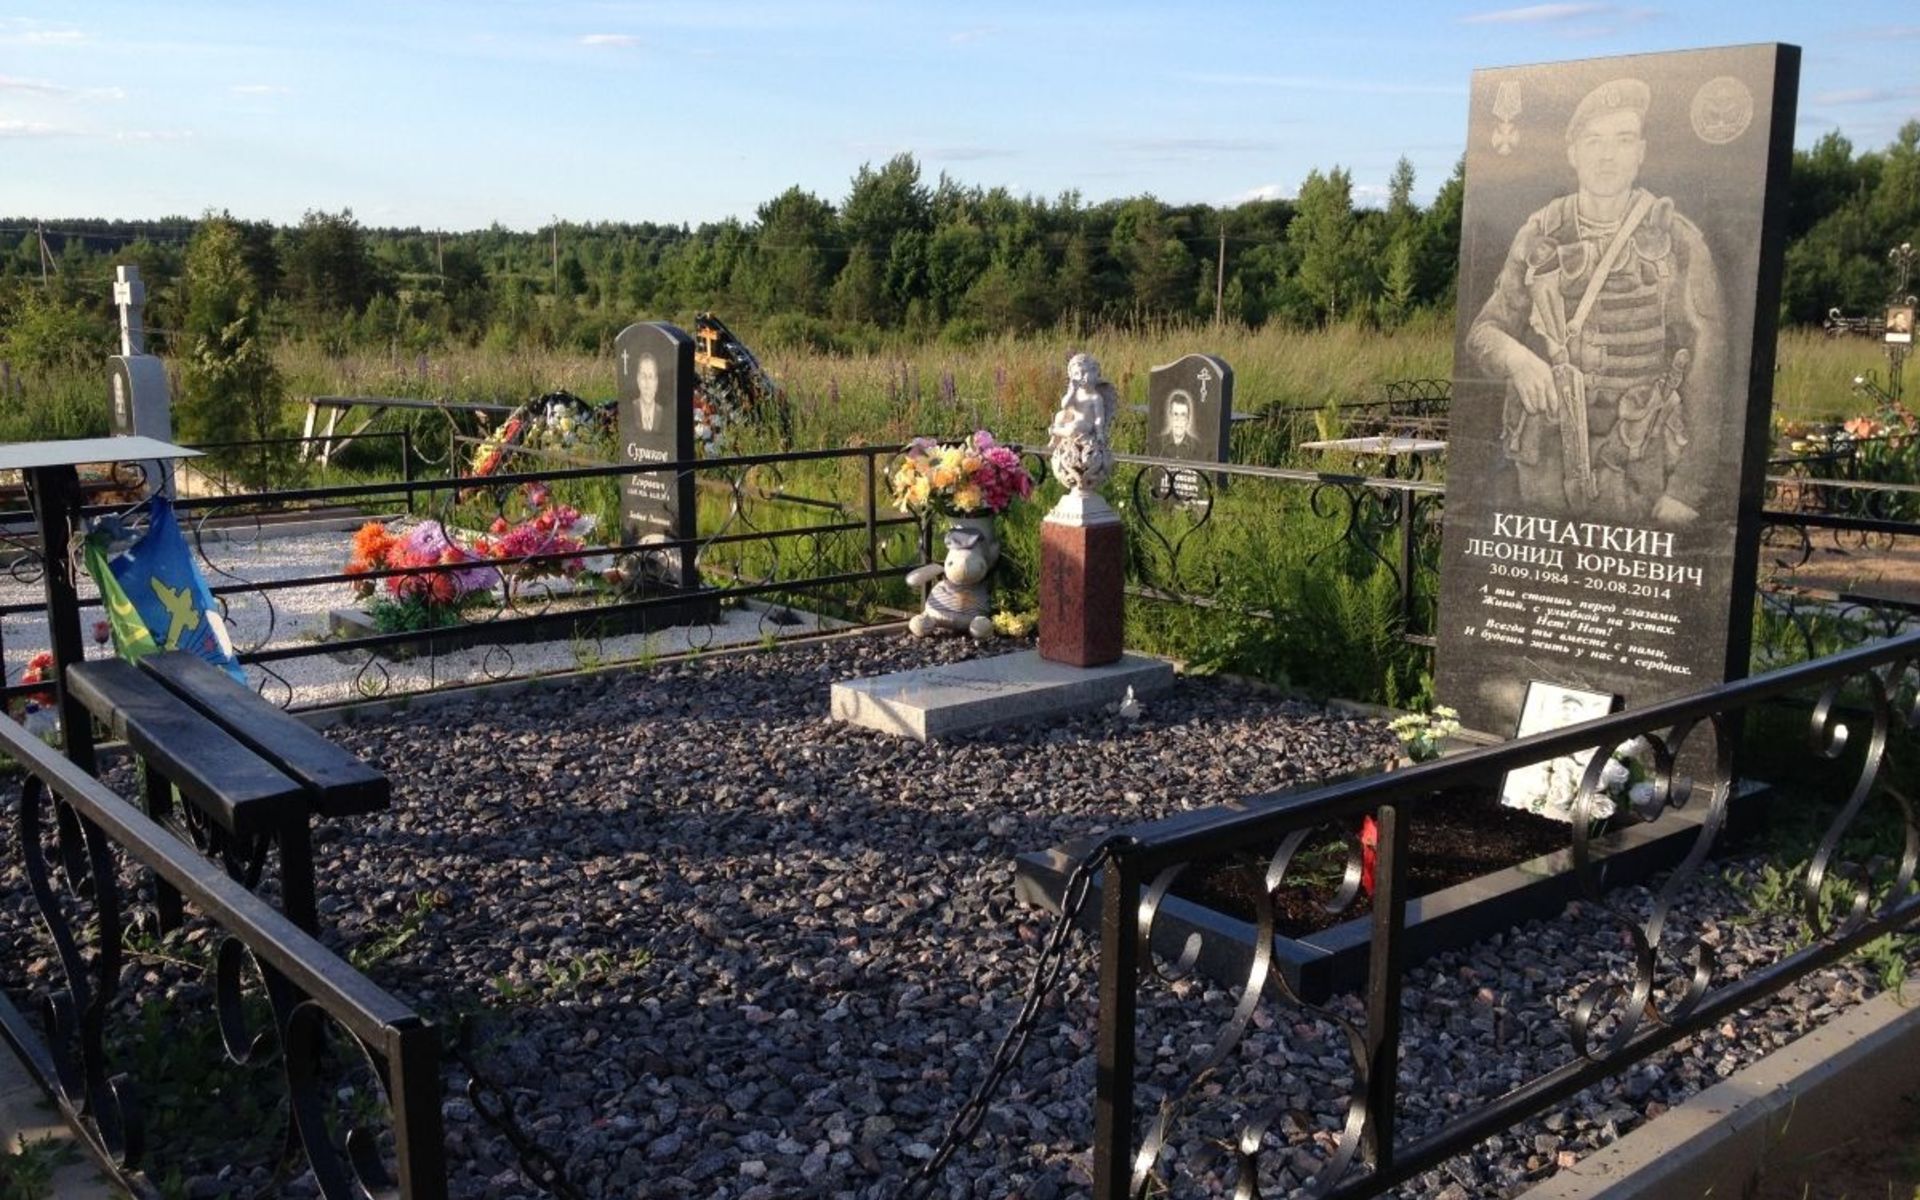 A view from the cemetery near Pskov, Russia where paratroopers of Russia's elite 76th Guards Air Assault Division killed in action in Ukraine and Syria are laid to rest. (Image: novayagazeta.ru)